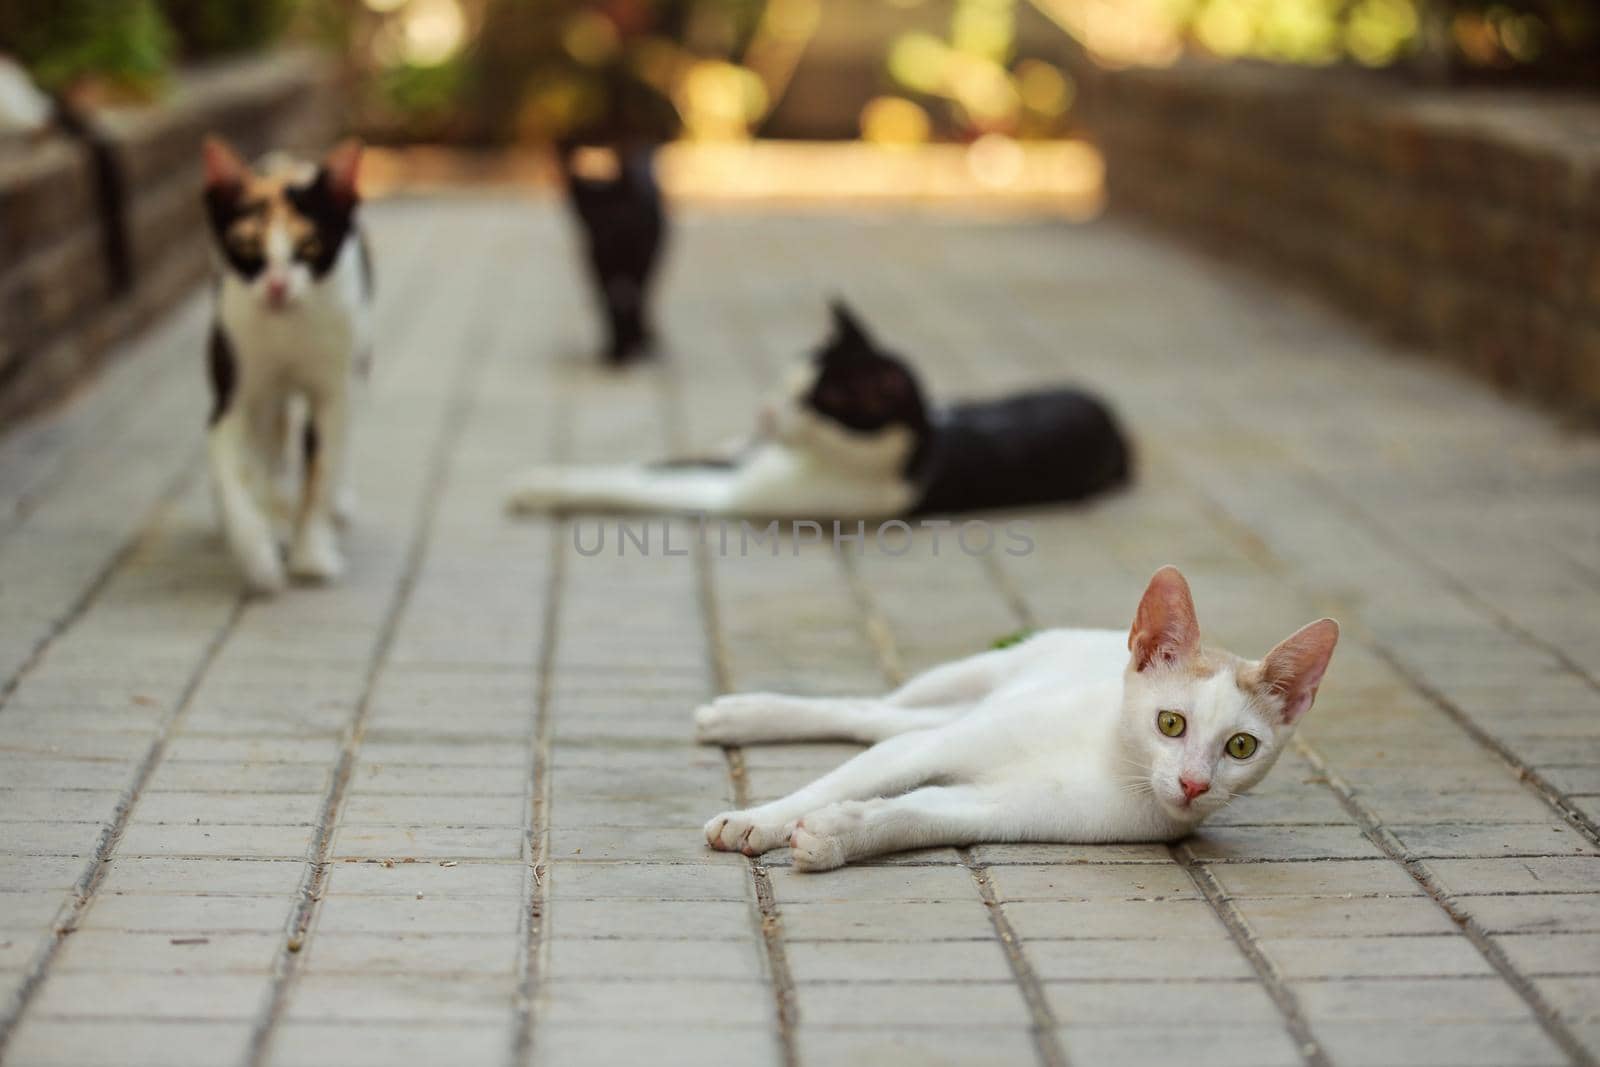 White stray cat laying on concrete pavement in hotel resort, more cats in background. by Ivanko